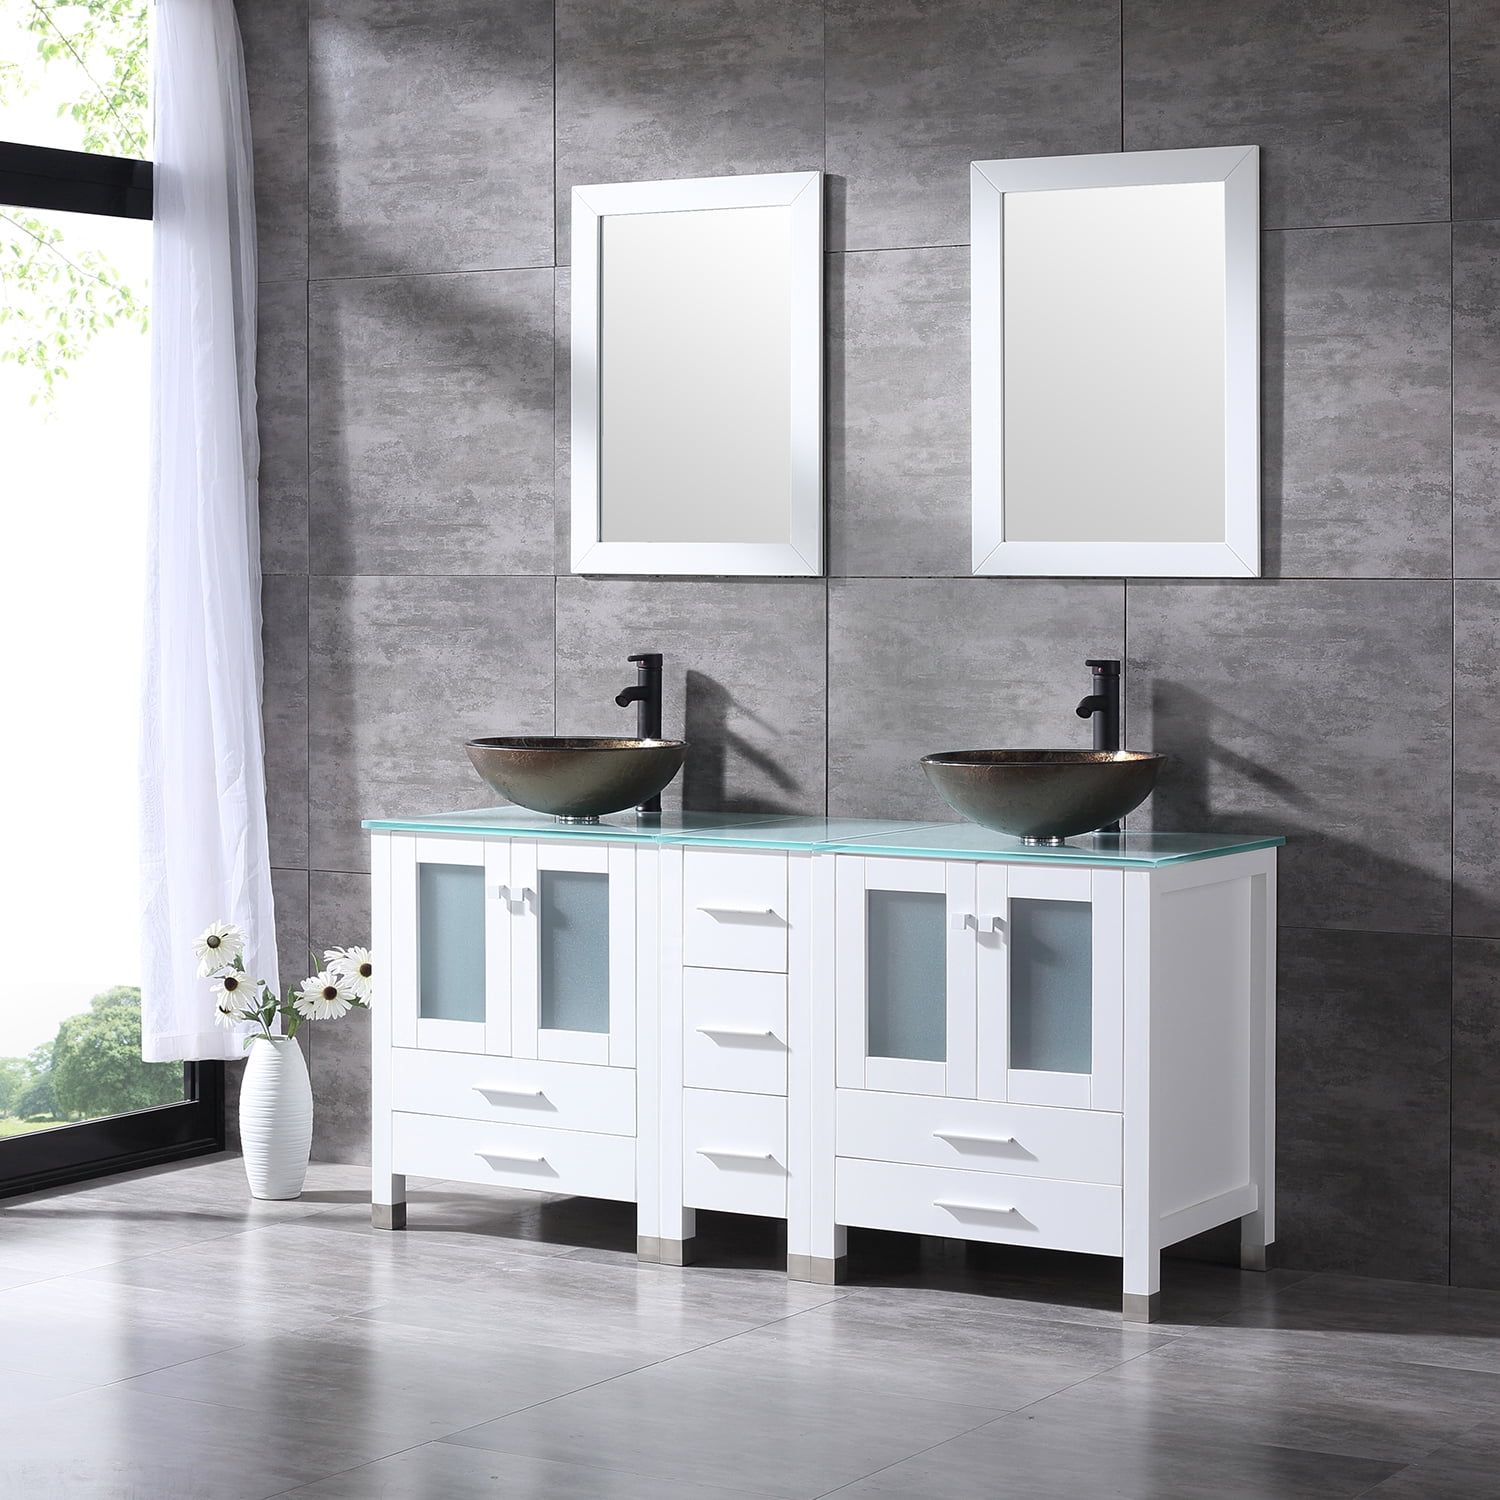 Details about   16" Bathroom Vanity Wall Mount Cabinet Ceramic Sink Faucet Vessel Drain Combo US 